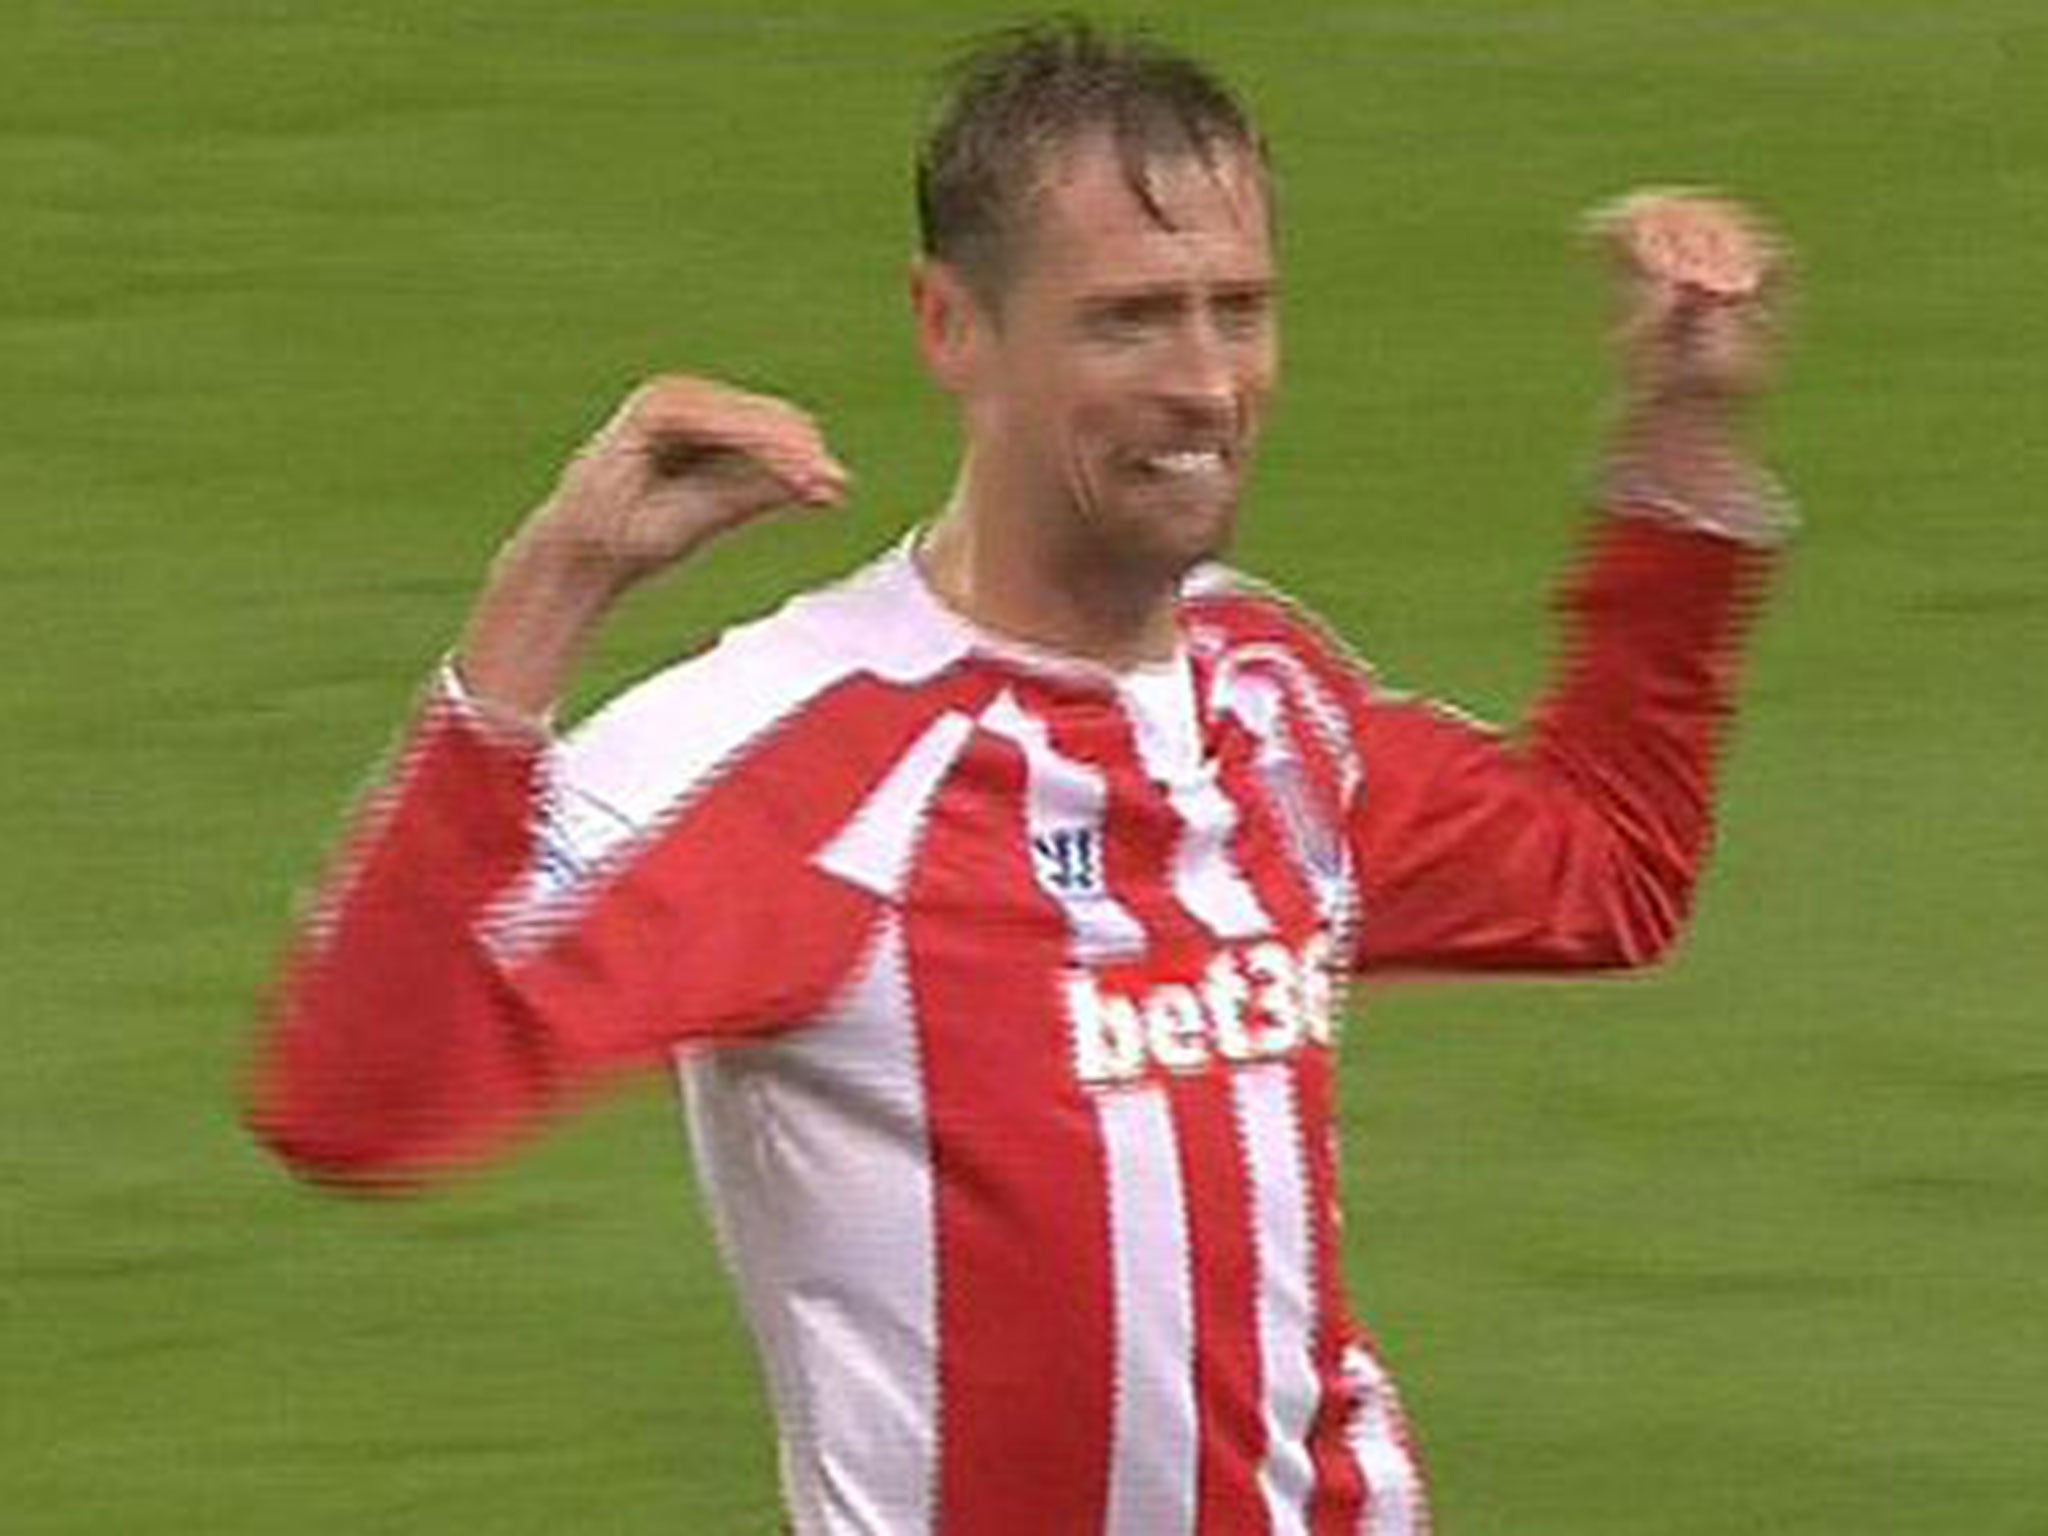 Peter Crouch celebrates his goal with the birdie